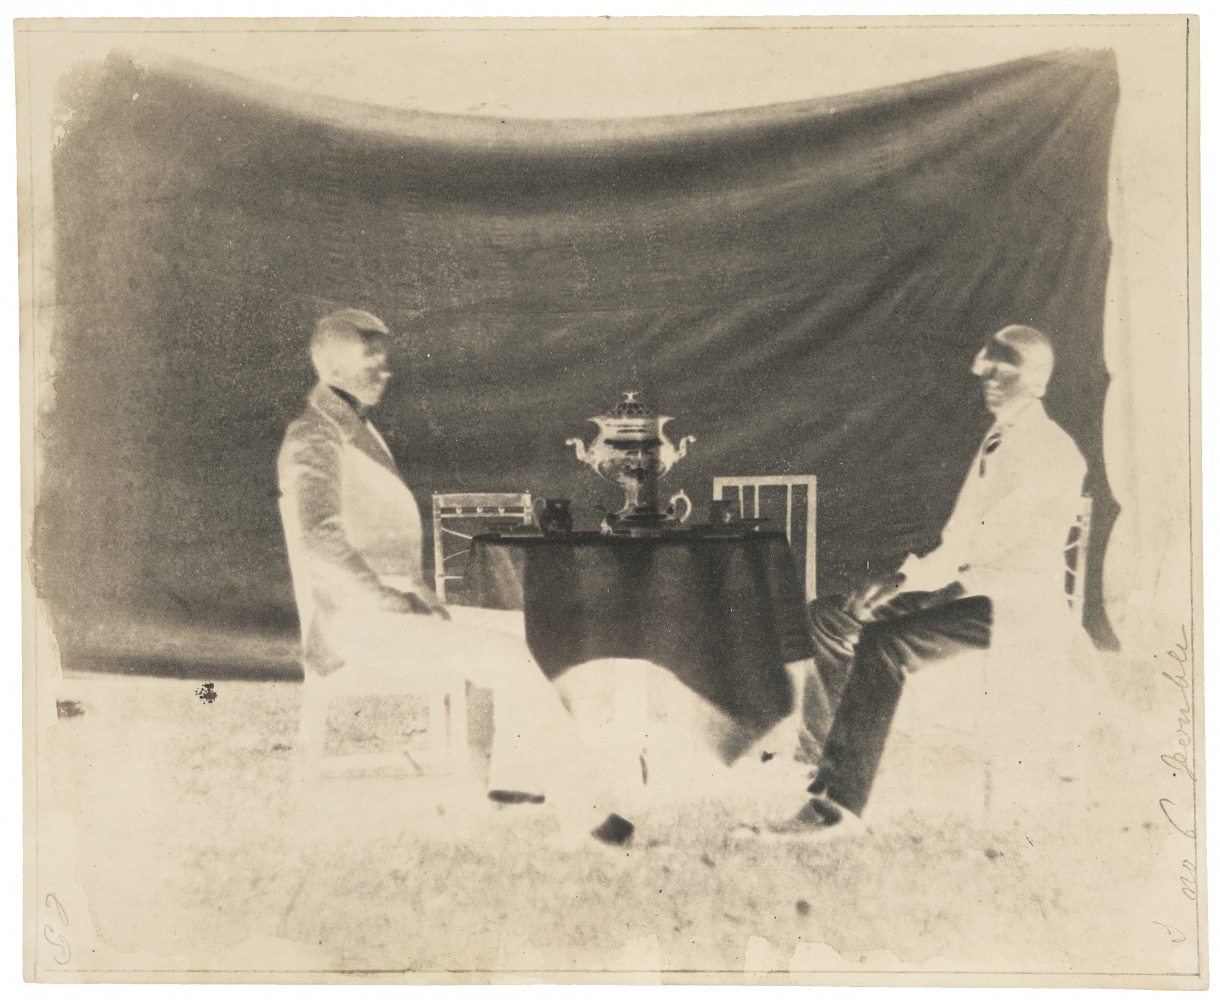 William Henry Fox TALBOT (English, 1800-1877) Charles Porter and another man, circa 1843 Calotype negative 18.8 x 22.9 cm Ruled at edges, inscribed "C.P." and "n. 6 Double" in pencil